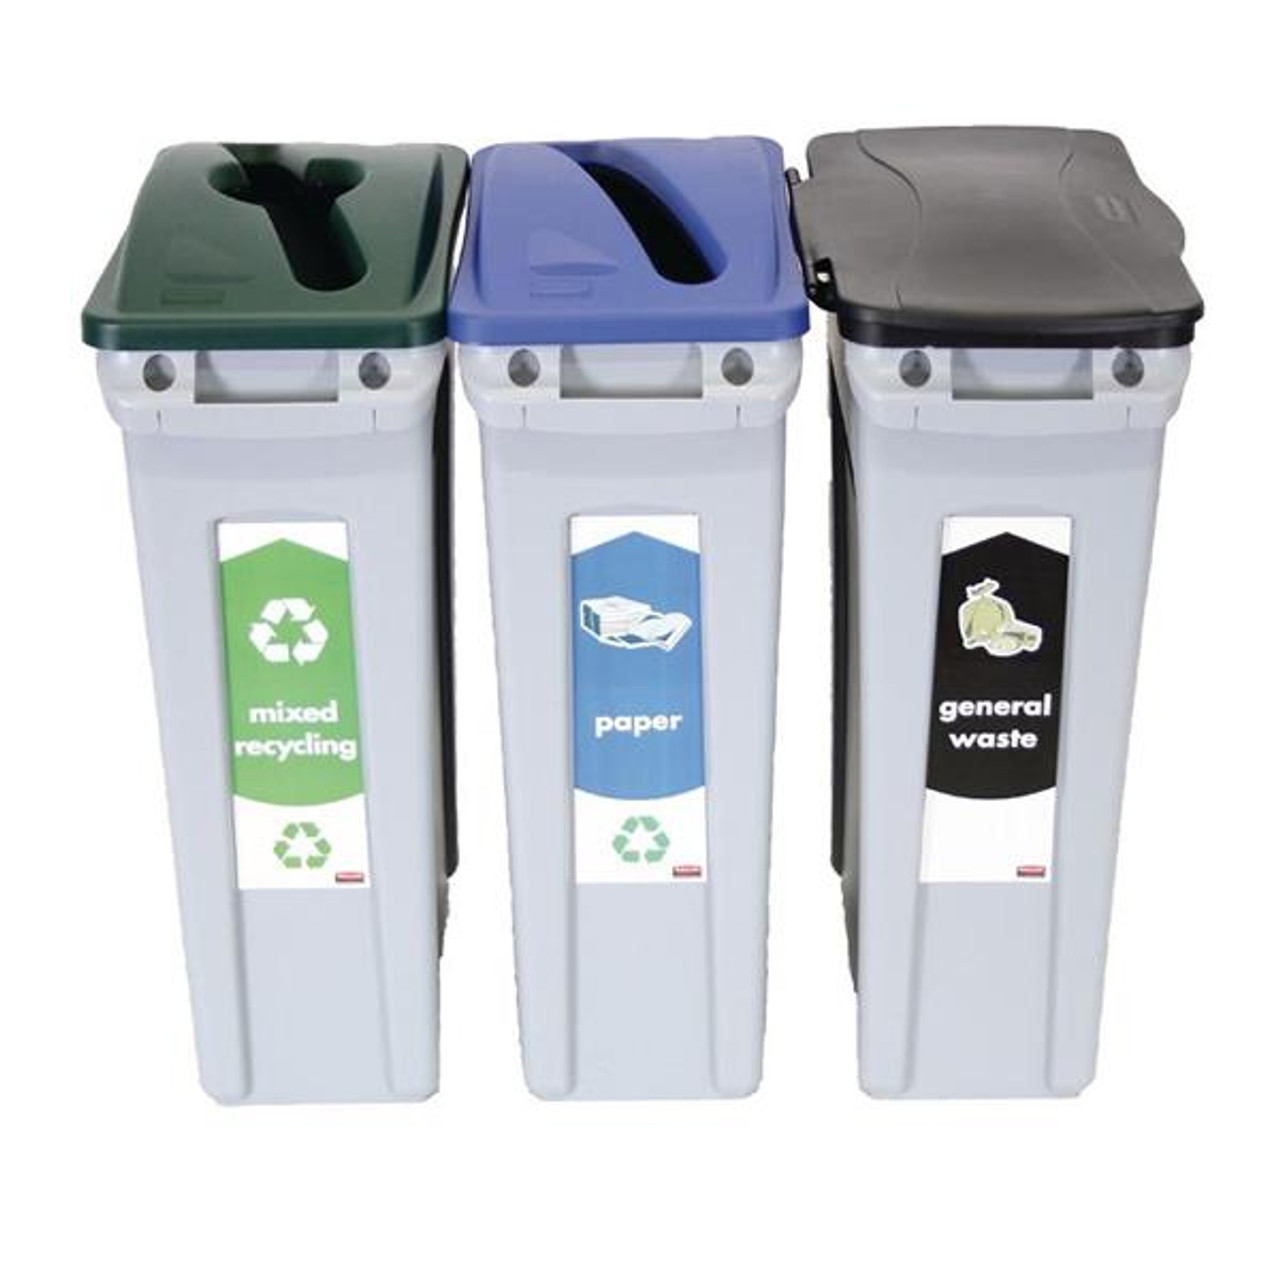 Rubbermaid 3 Stream Slim Jim Recycling Starter Pack - Includes 3 Recycling Bins